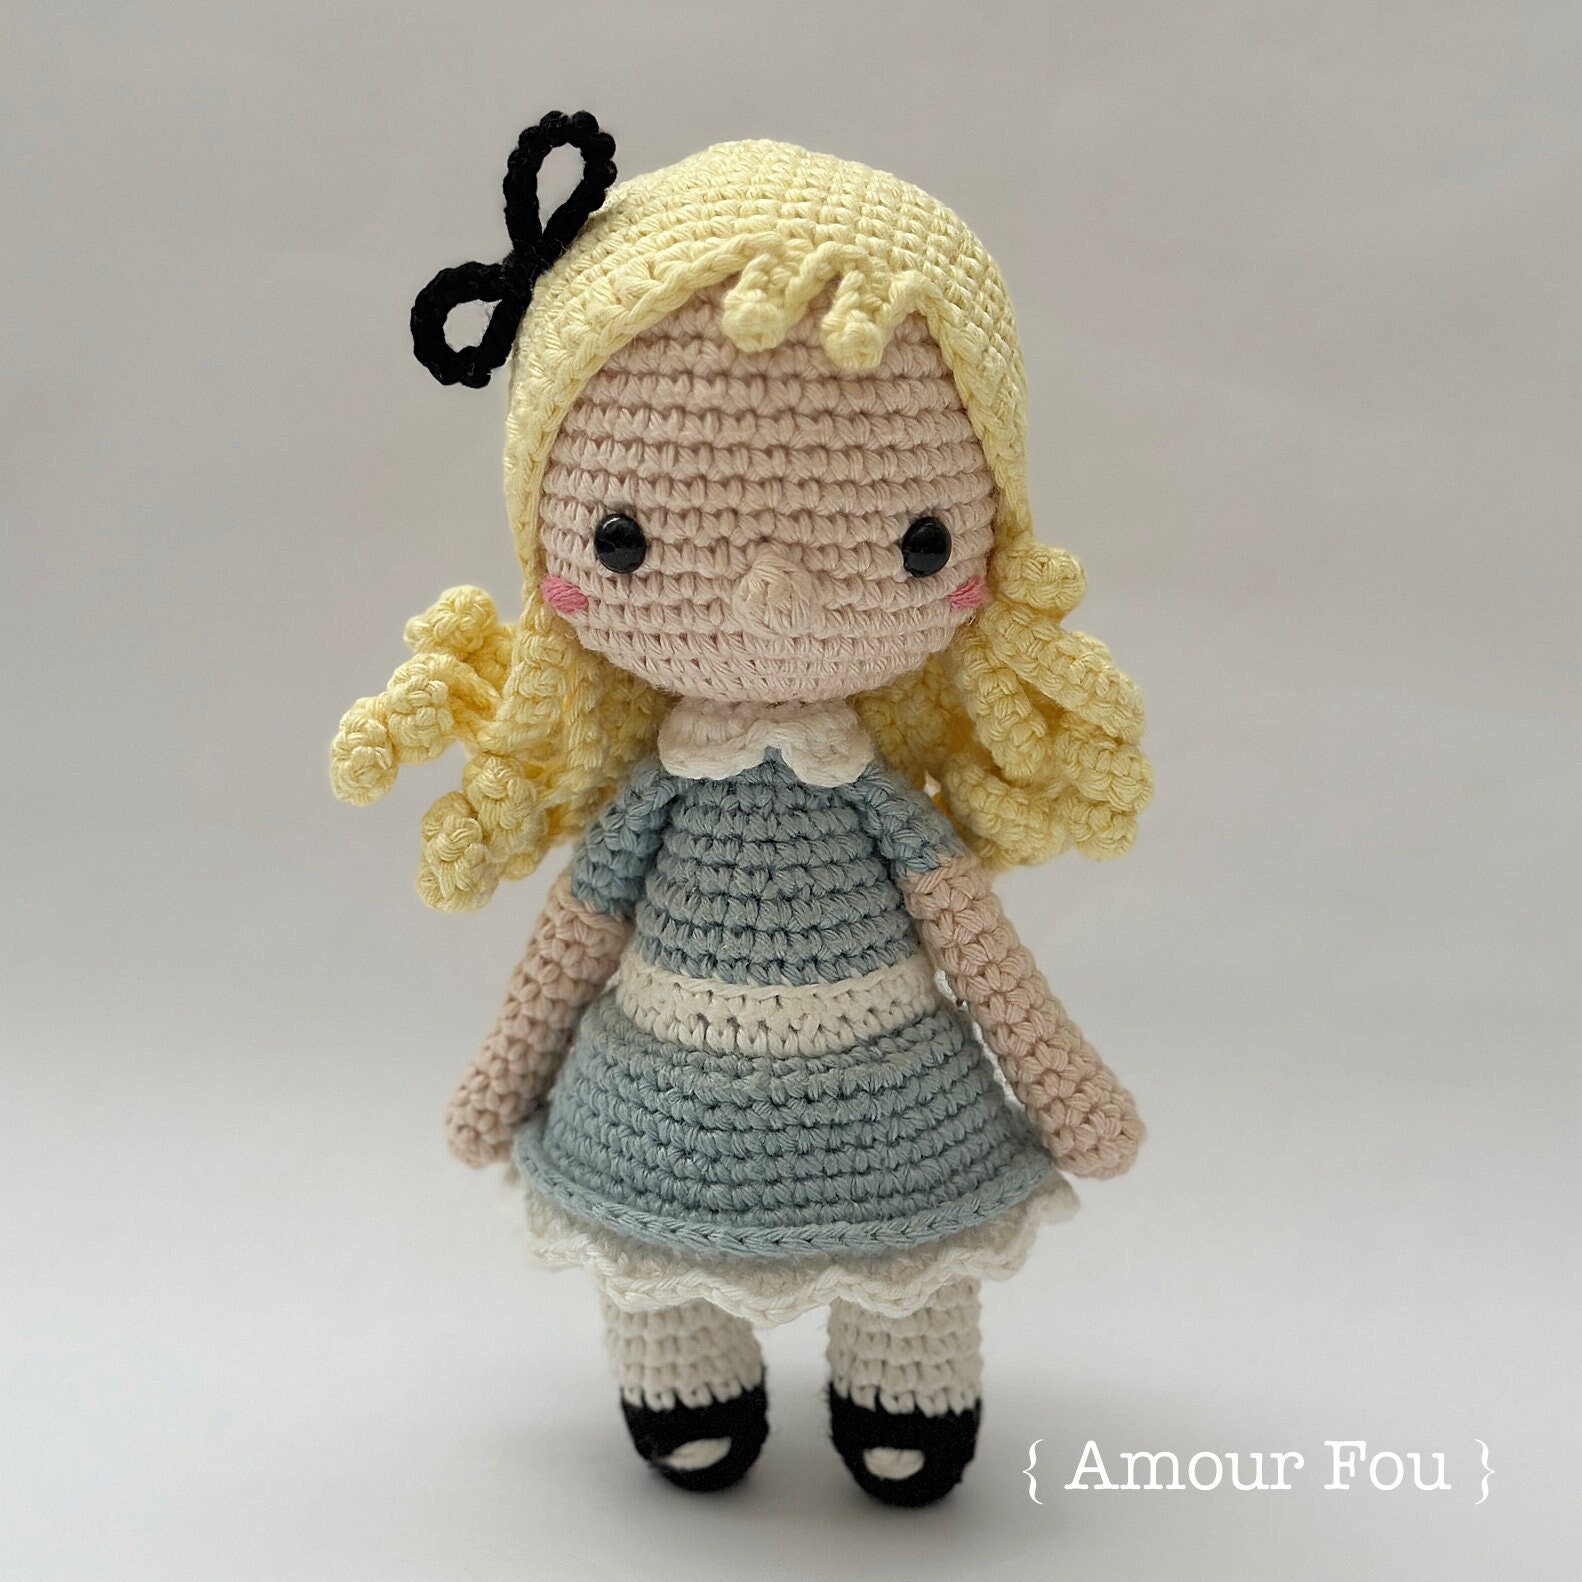 E-book Crochet Pattern Amigurumi PDF Pack Alice in Wonderland: Alice, Mad  Hatter, Red Queen, White Rabbit and Cheshire Cat PDF english 